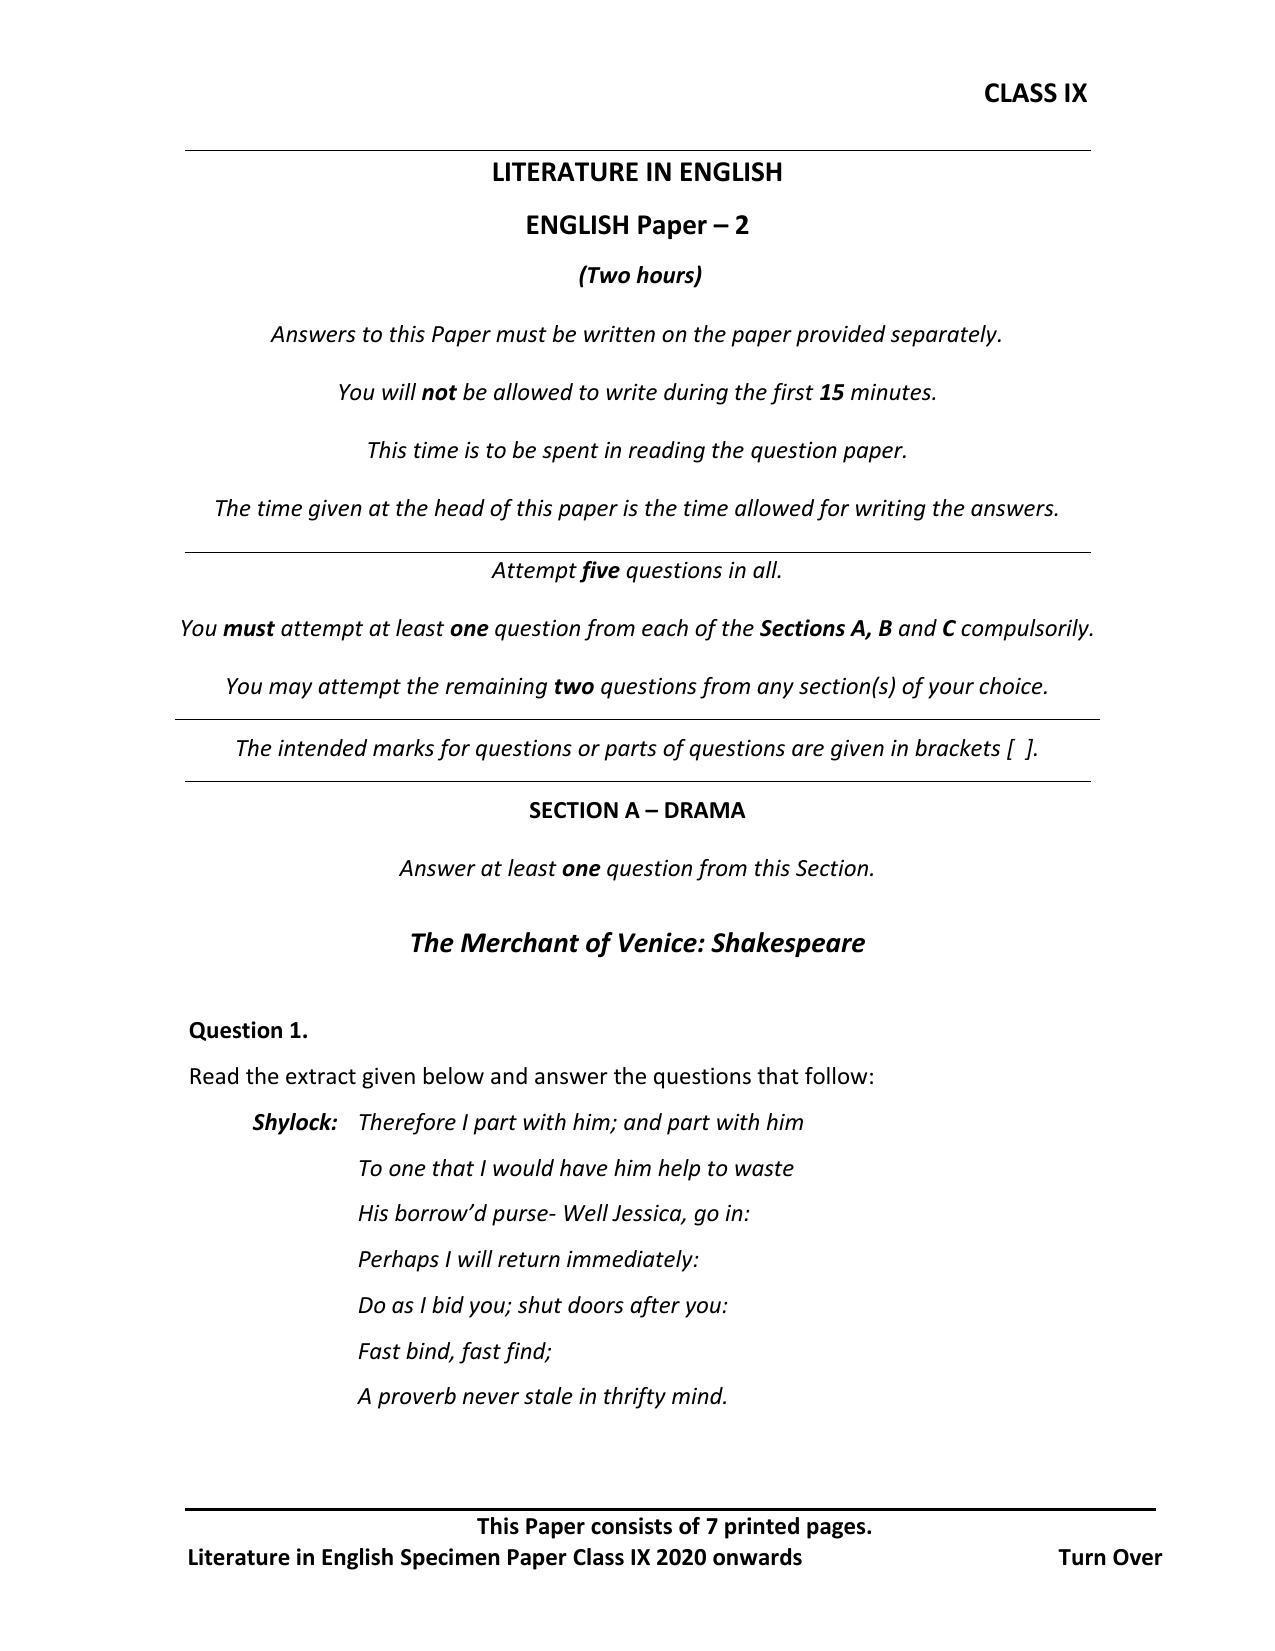  ICSE Class 9 English Paper 2 (LITERATURE IN ENGLISH) Sample Paper - Page 1